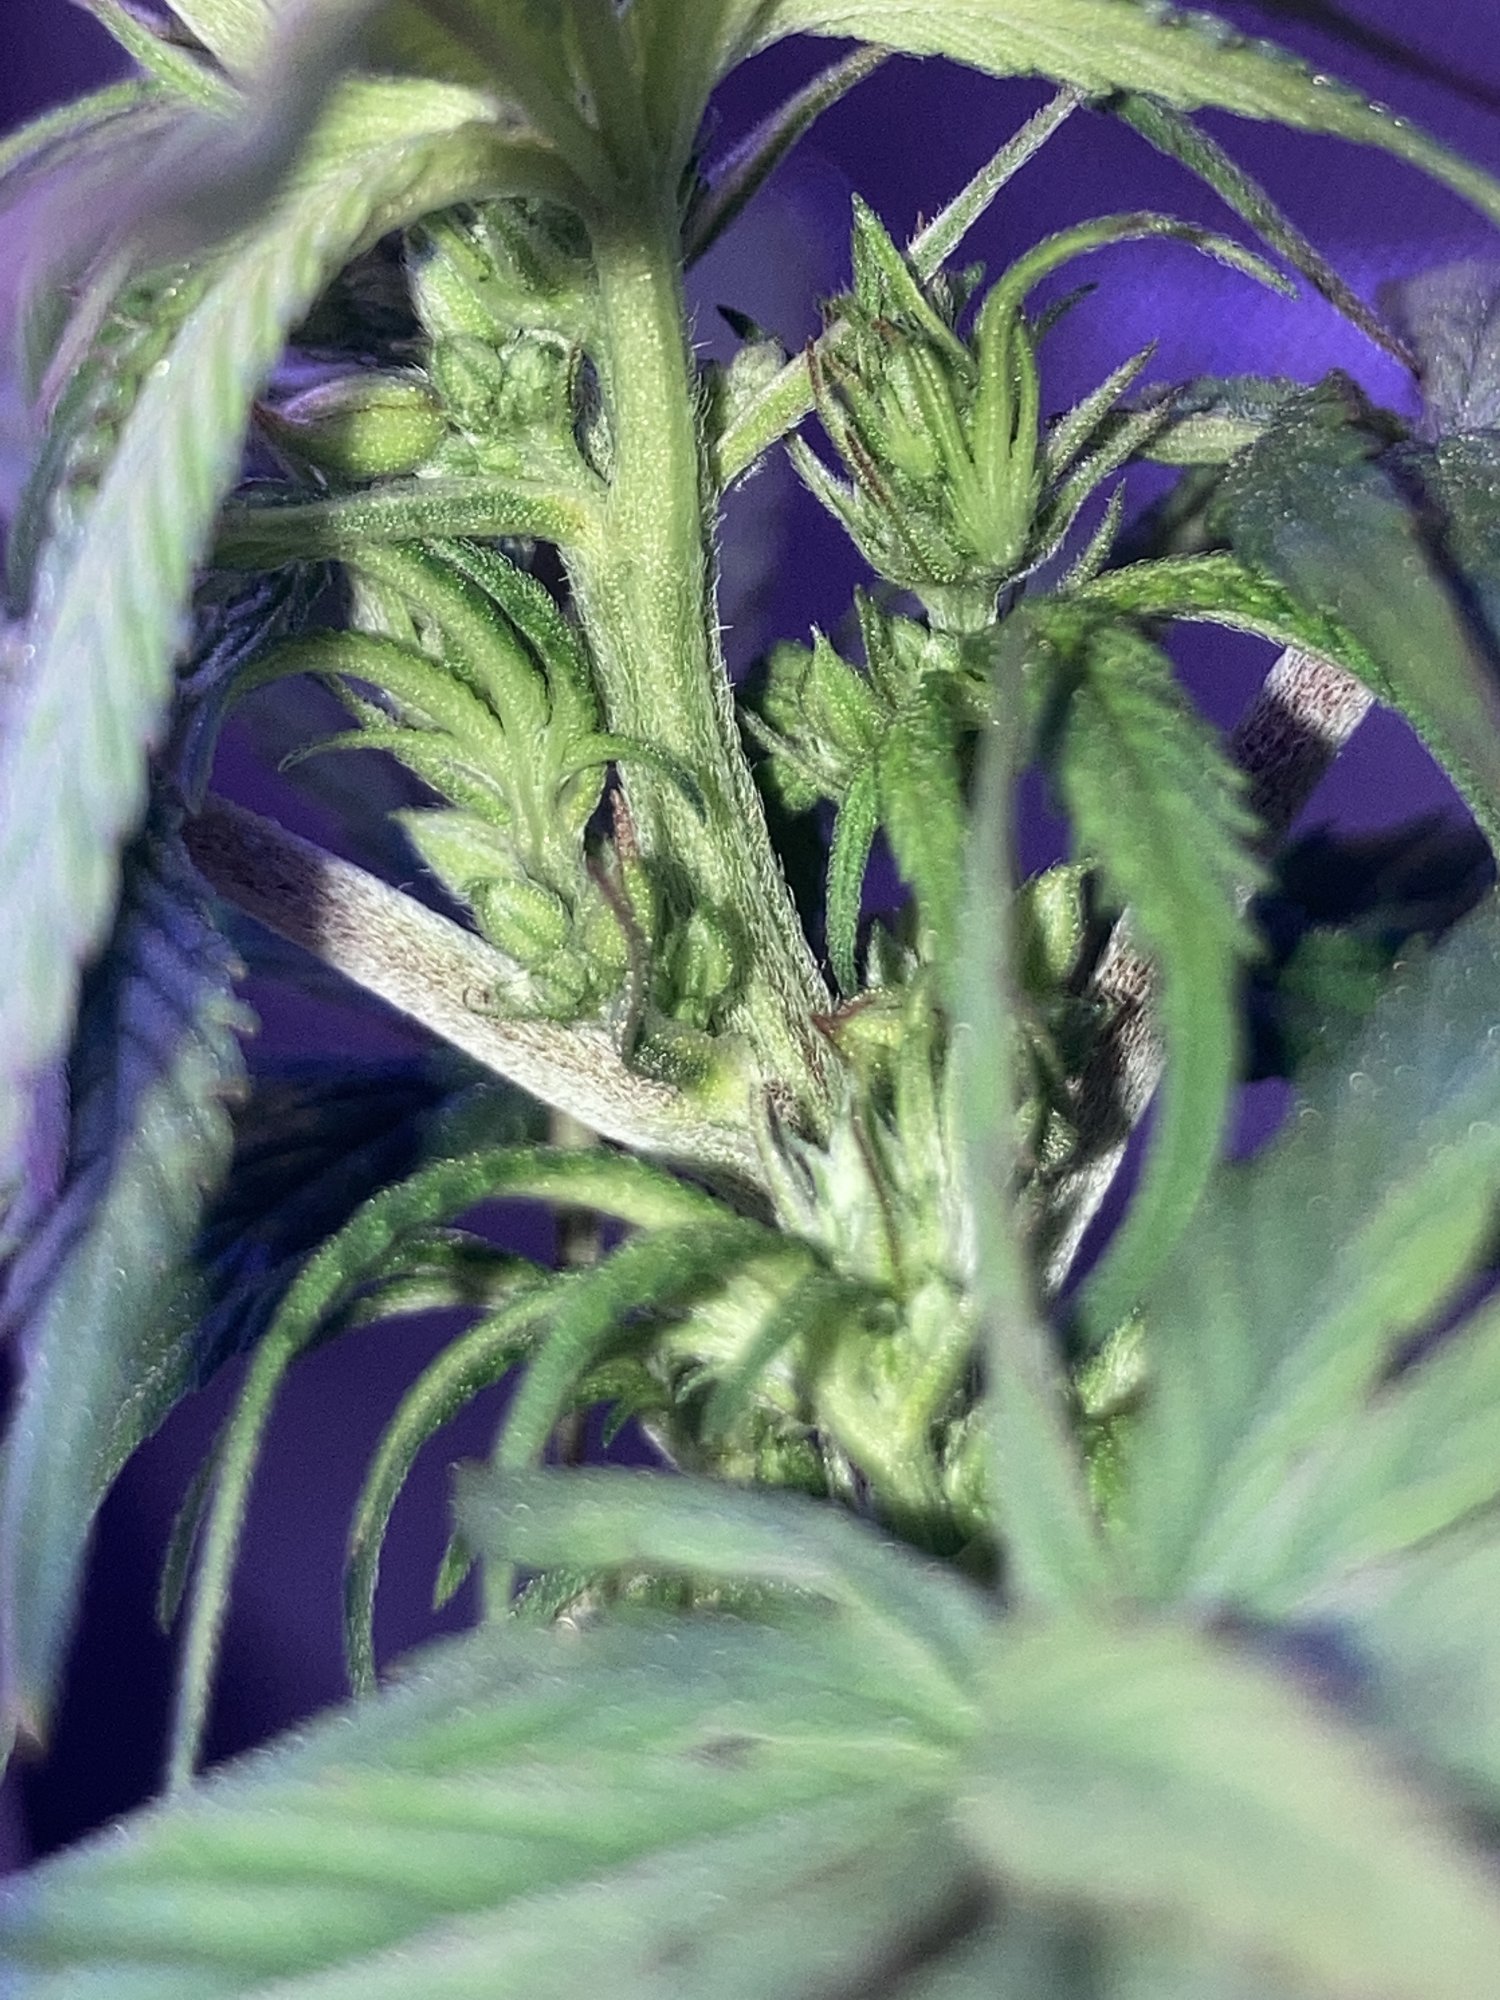 First time growing need clarity 2